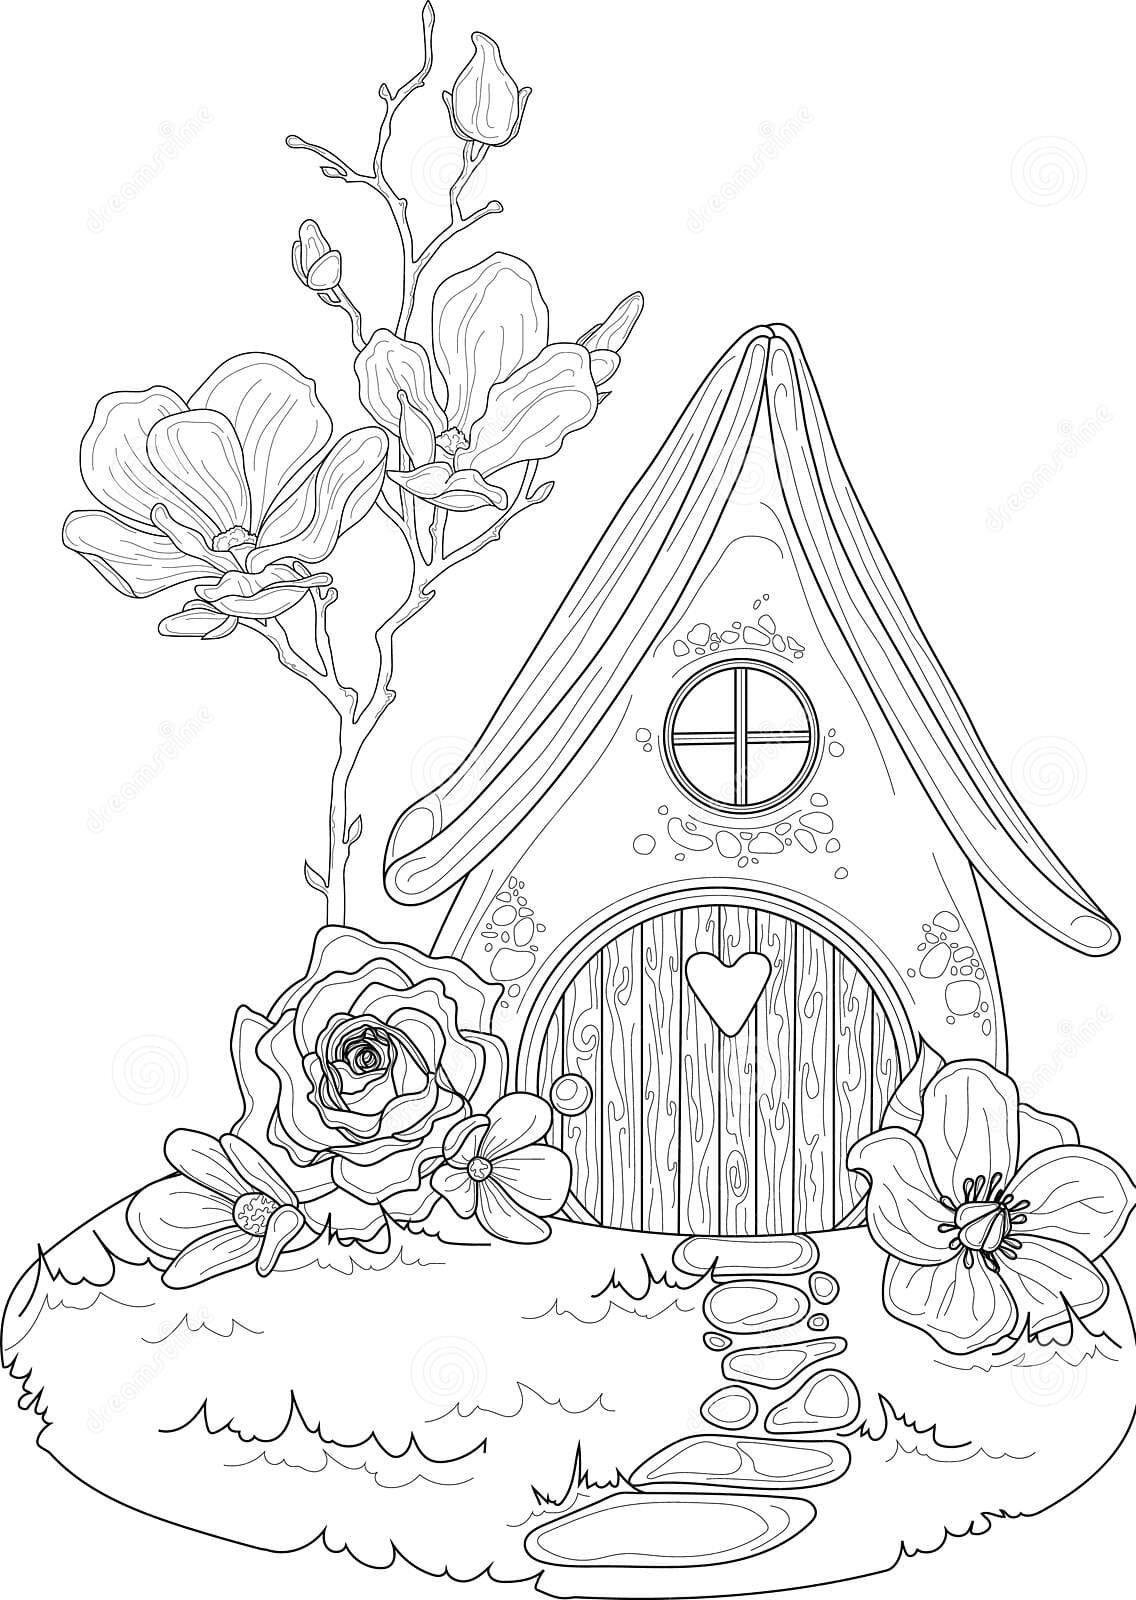 Cartoon Fantasy Graphic Elf House With Roses And Magnolia Flowers Coloring Page